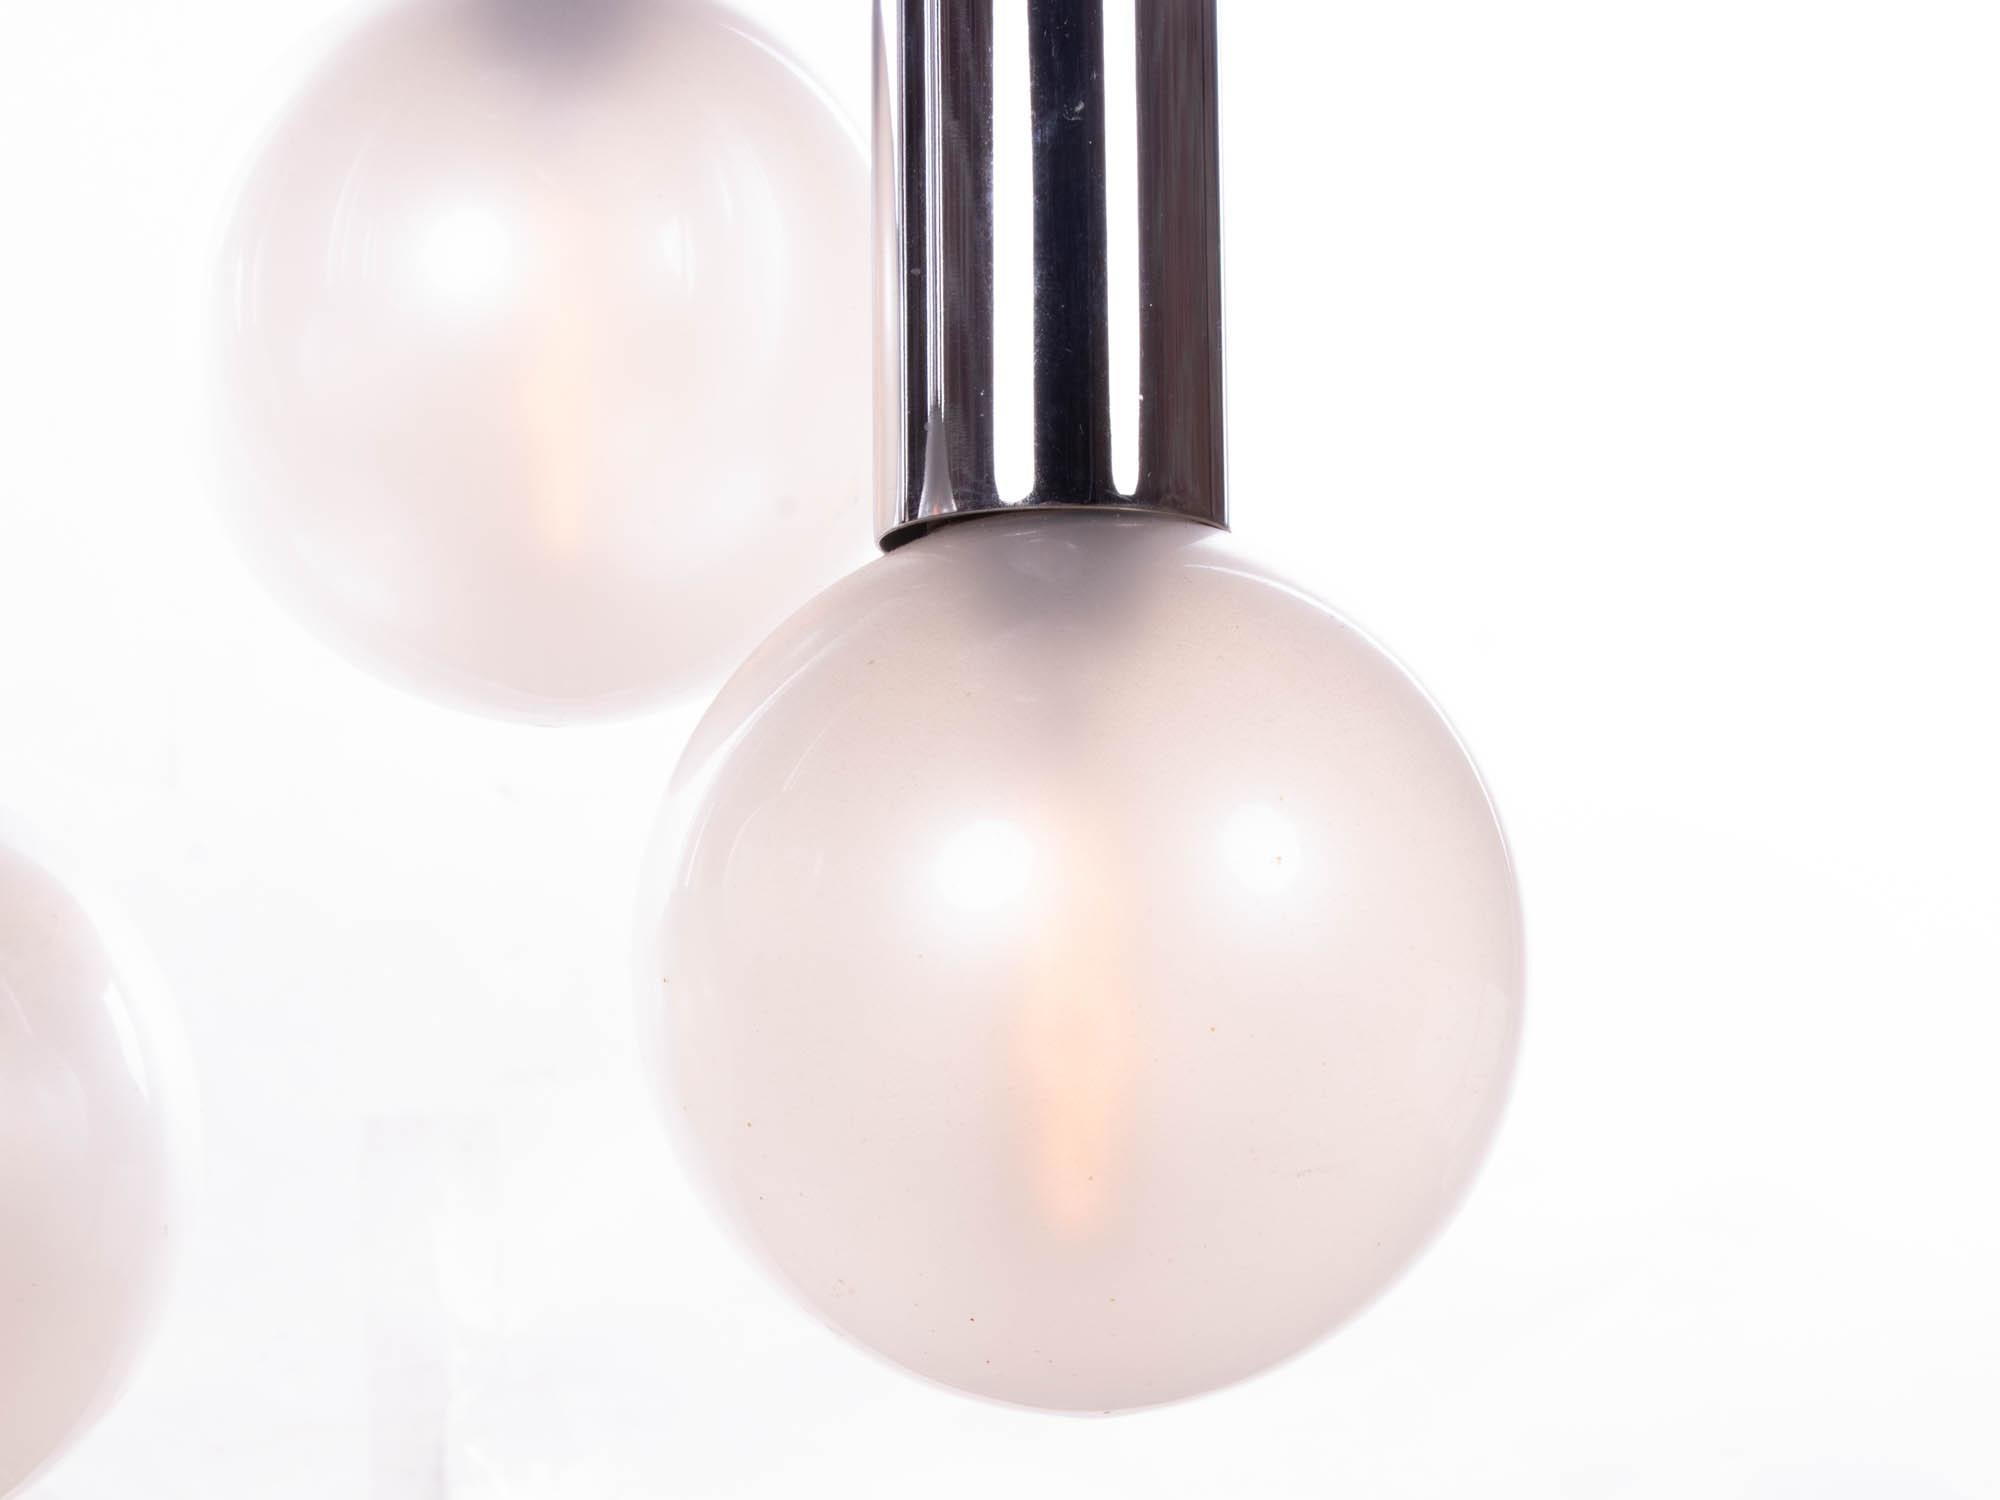 Elegant space age sputnik ceiling fixture with pearlized glass globes 'like bulbs' hanging on six chromed metal tubes. Chandelier illuminates beautifully and offers a lot of light. Designed by Motoko Ishii for Staff Lighting, Germany, 1970s.